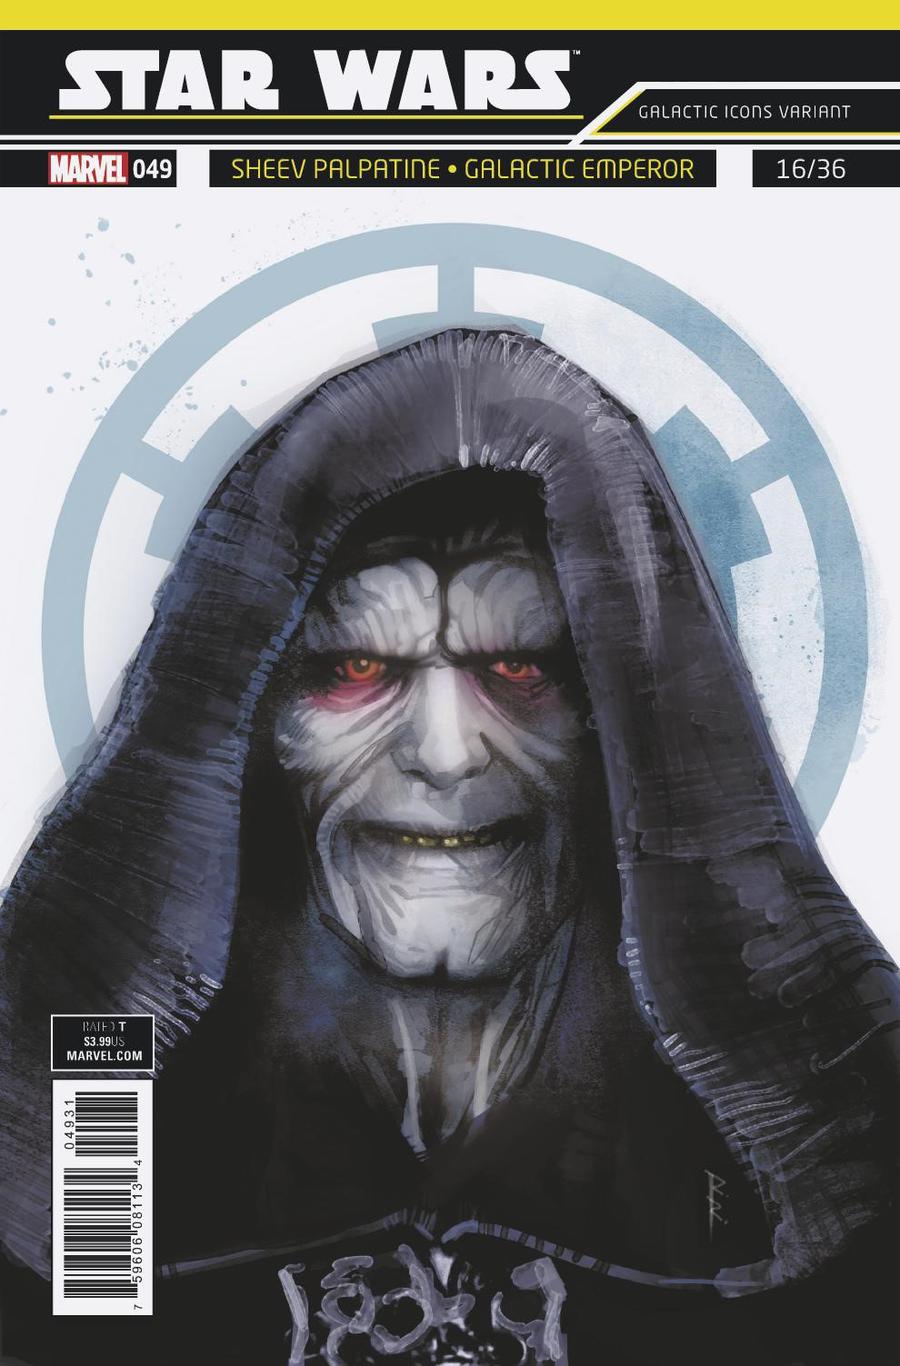 Star Wars Vol 4 #49 Cover C Variant Rod Reis Galactic Icon Cover